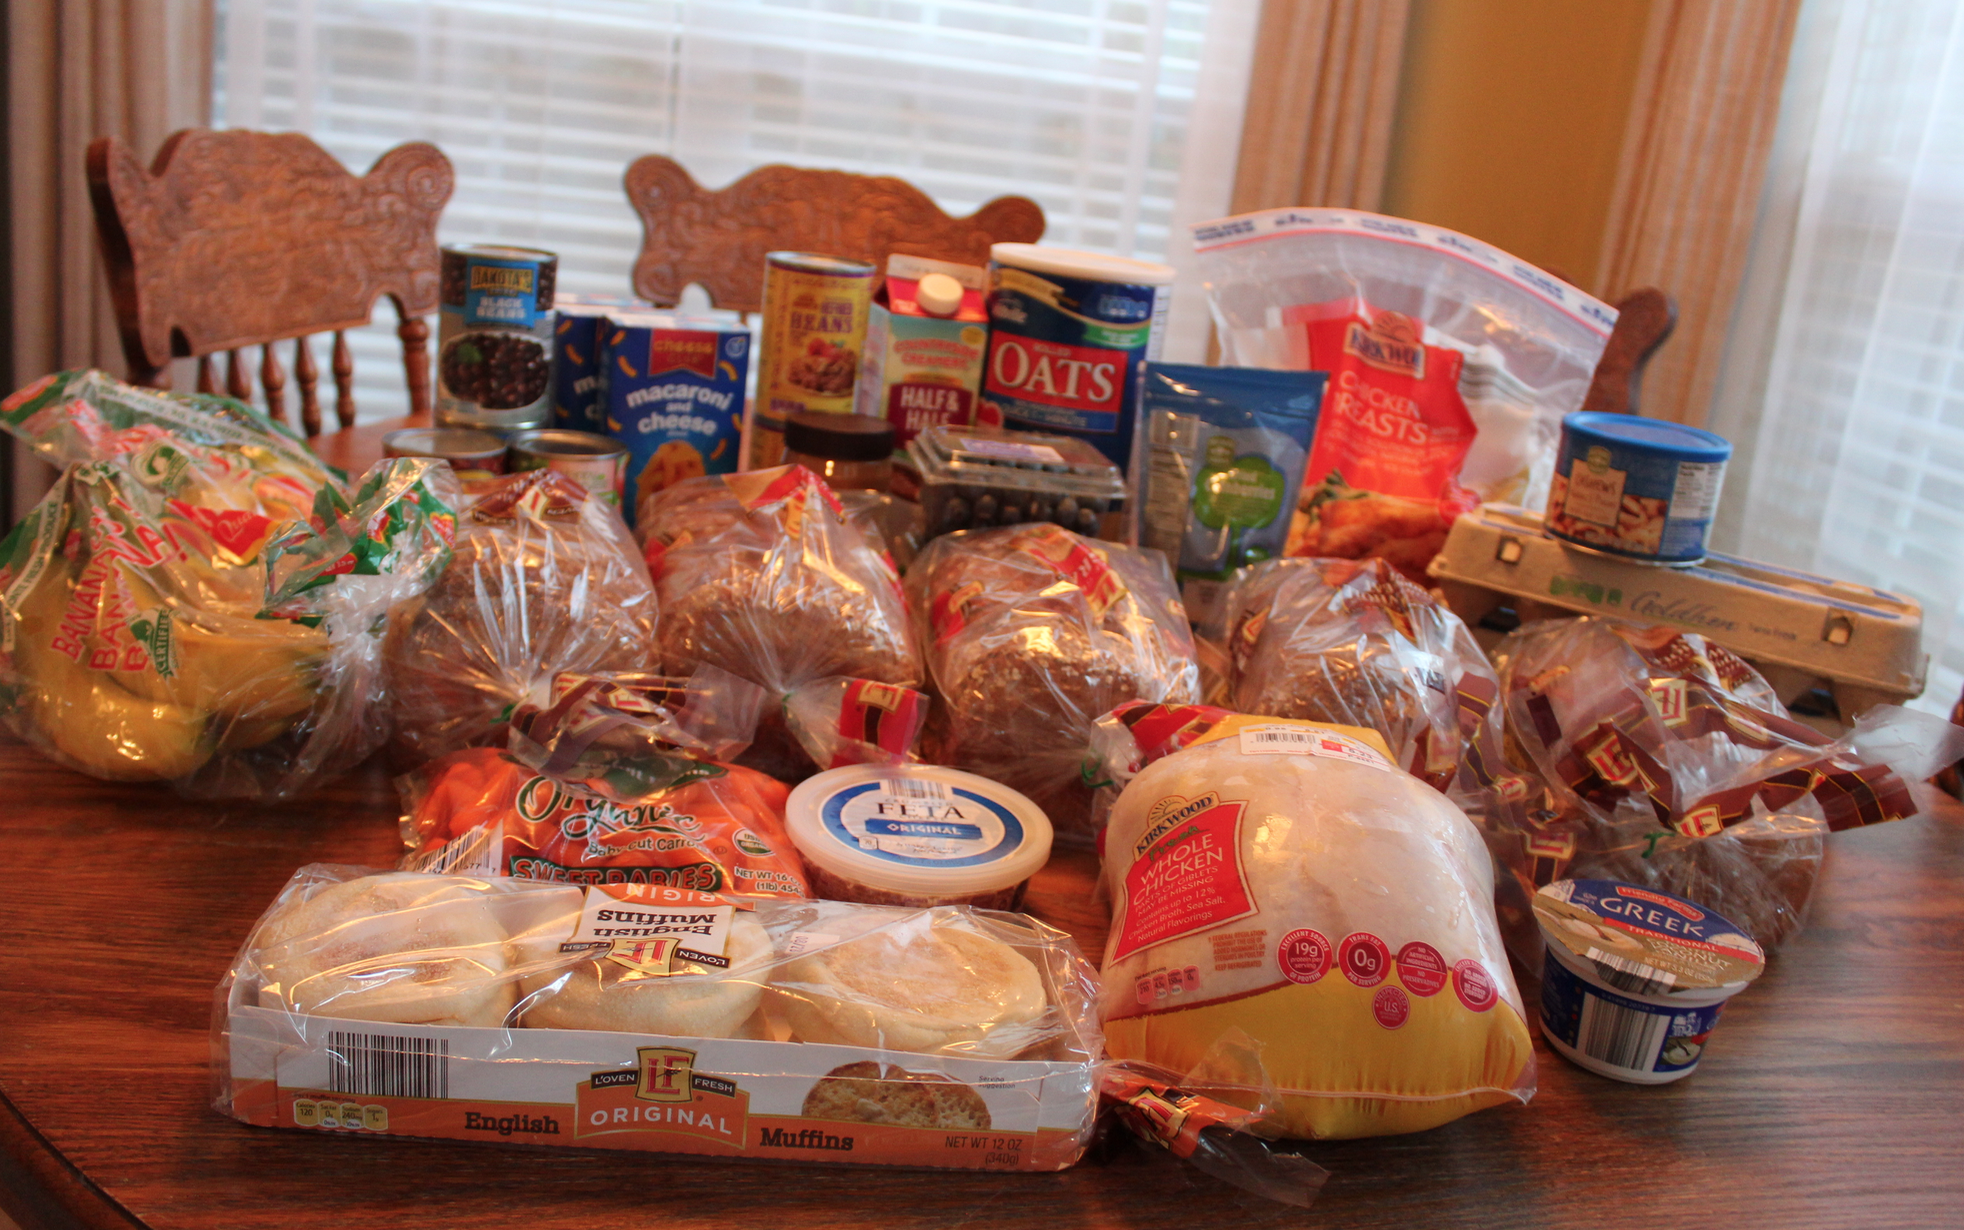 This Week's $80 Grocery Shopping Trip